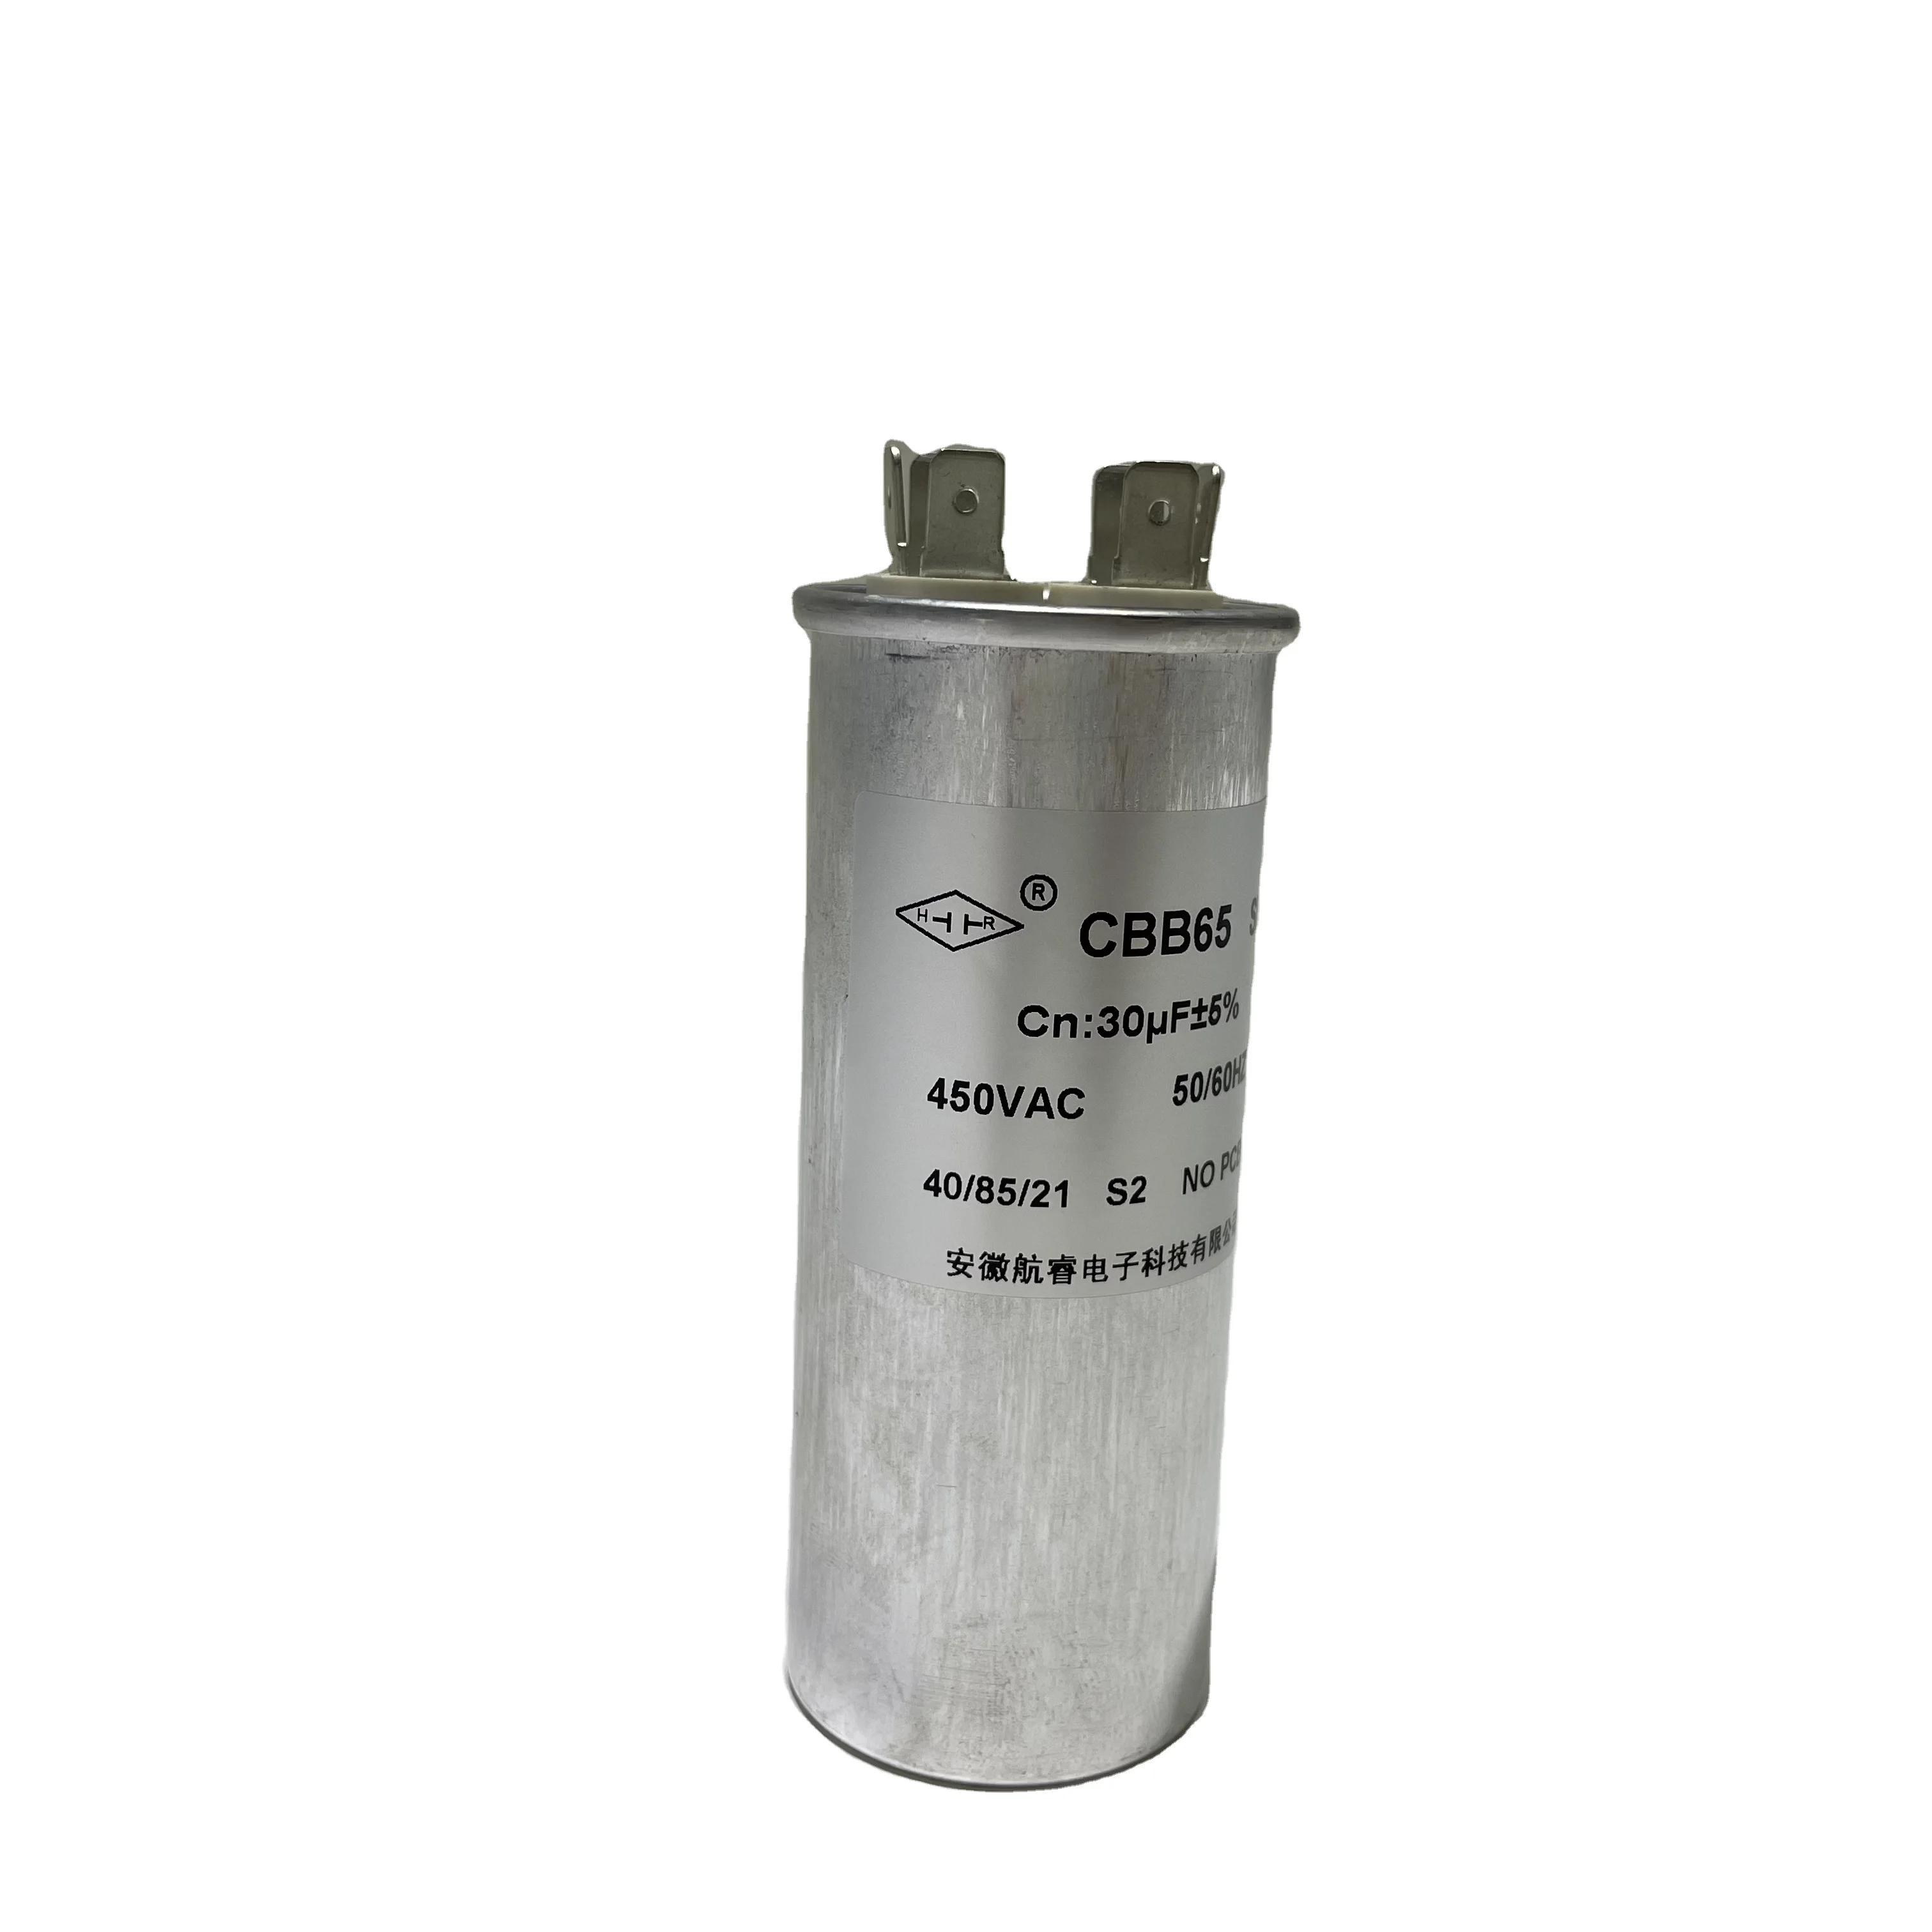 CBB65 capacitors power factor correction intelligent electric low voltge capacitor bank 450V 30uf